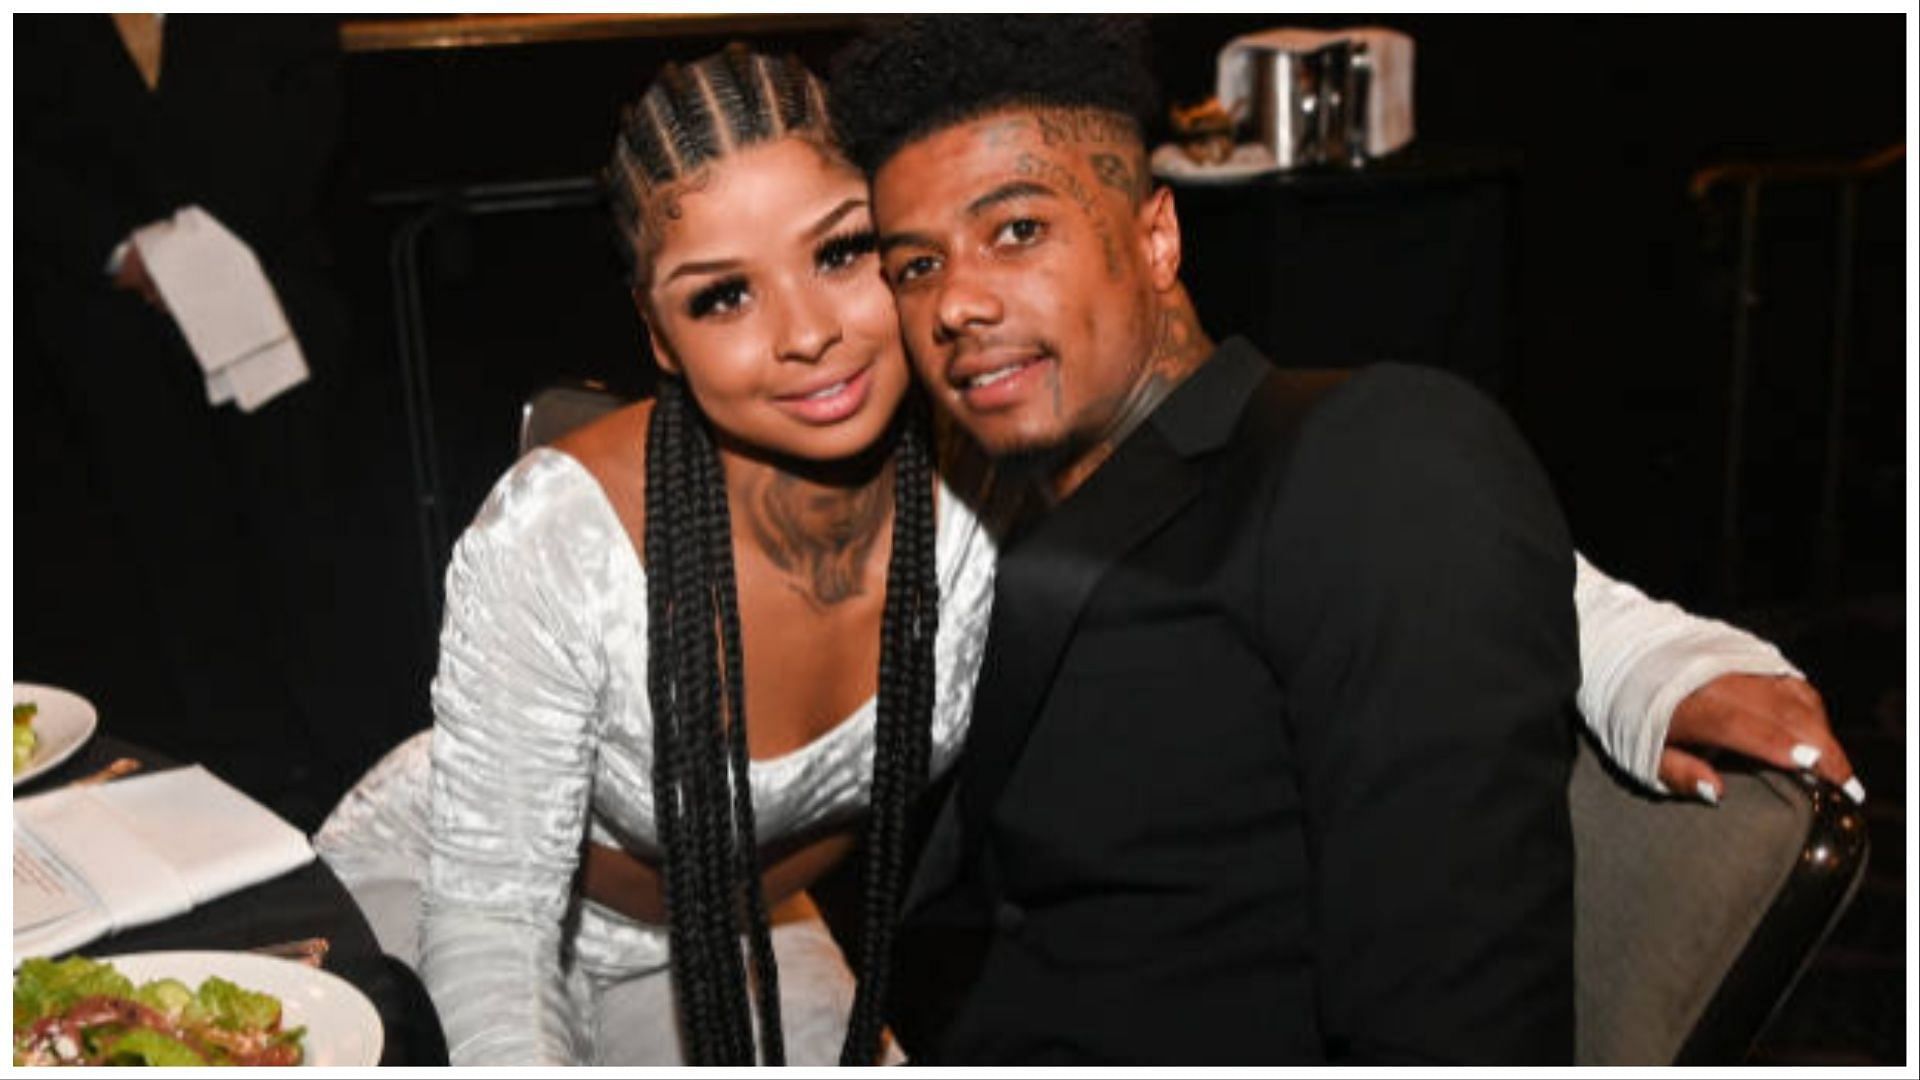 Chrisean Rock and Blueface are currently separated (Image via Getty Images)